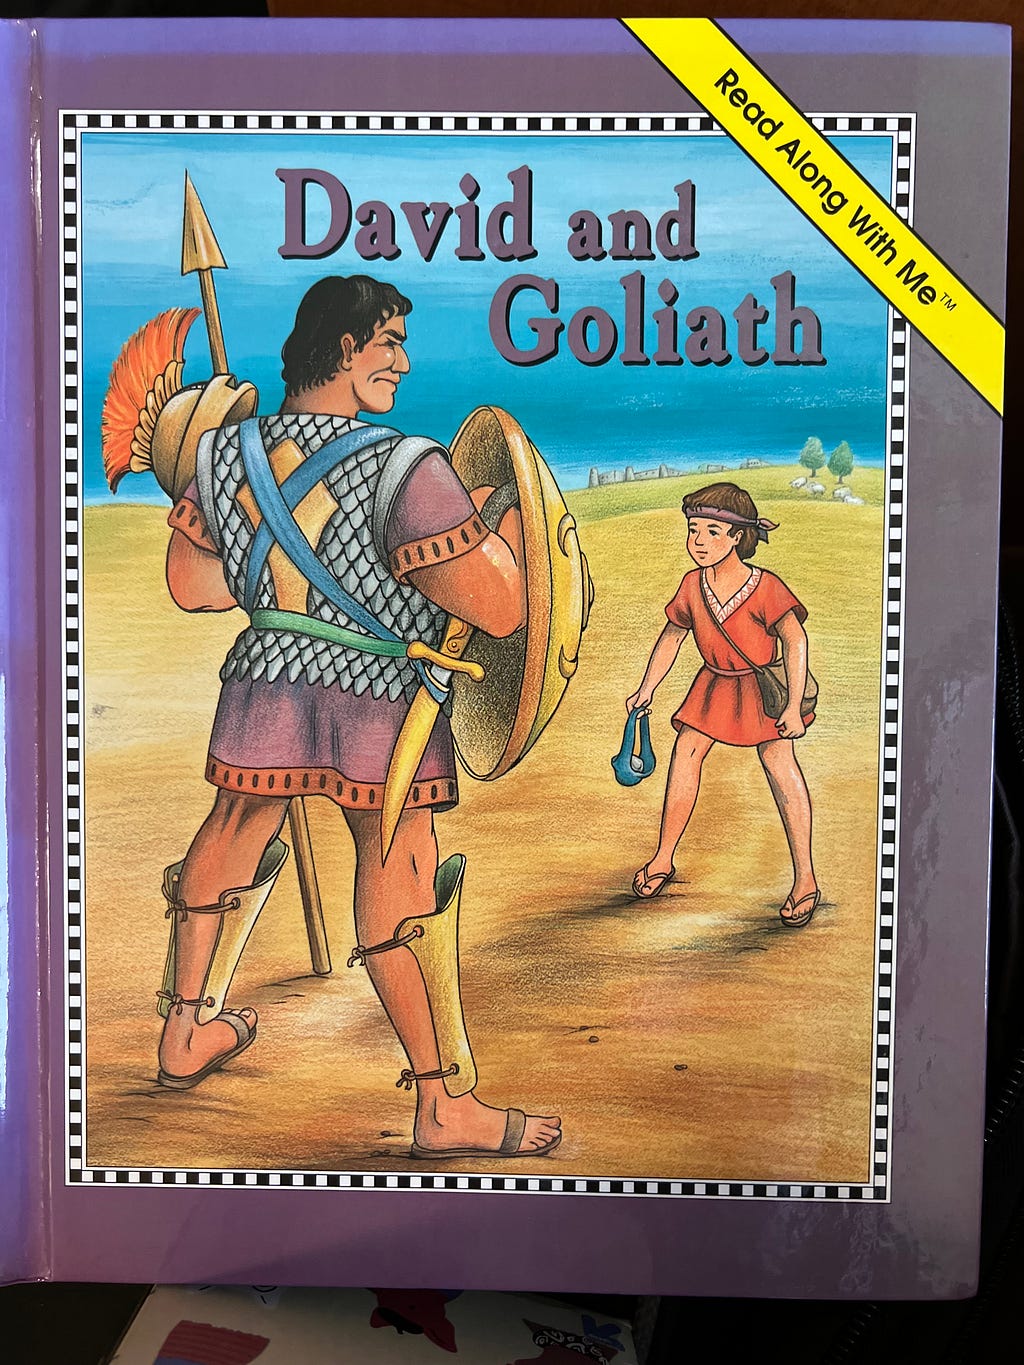 The David and Goliath book that my mother-in-law grabbed, randomly, for us to read to Breck.